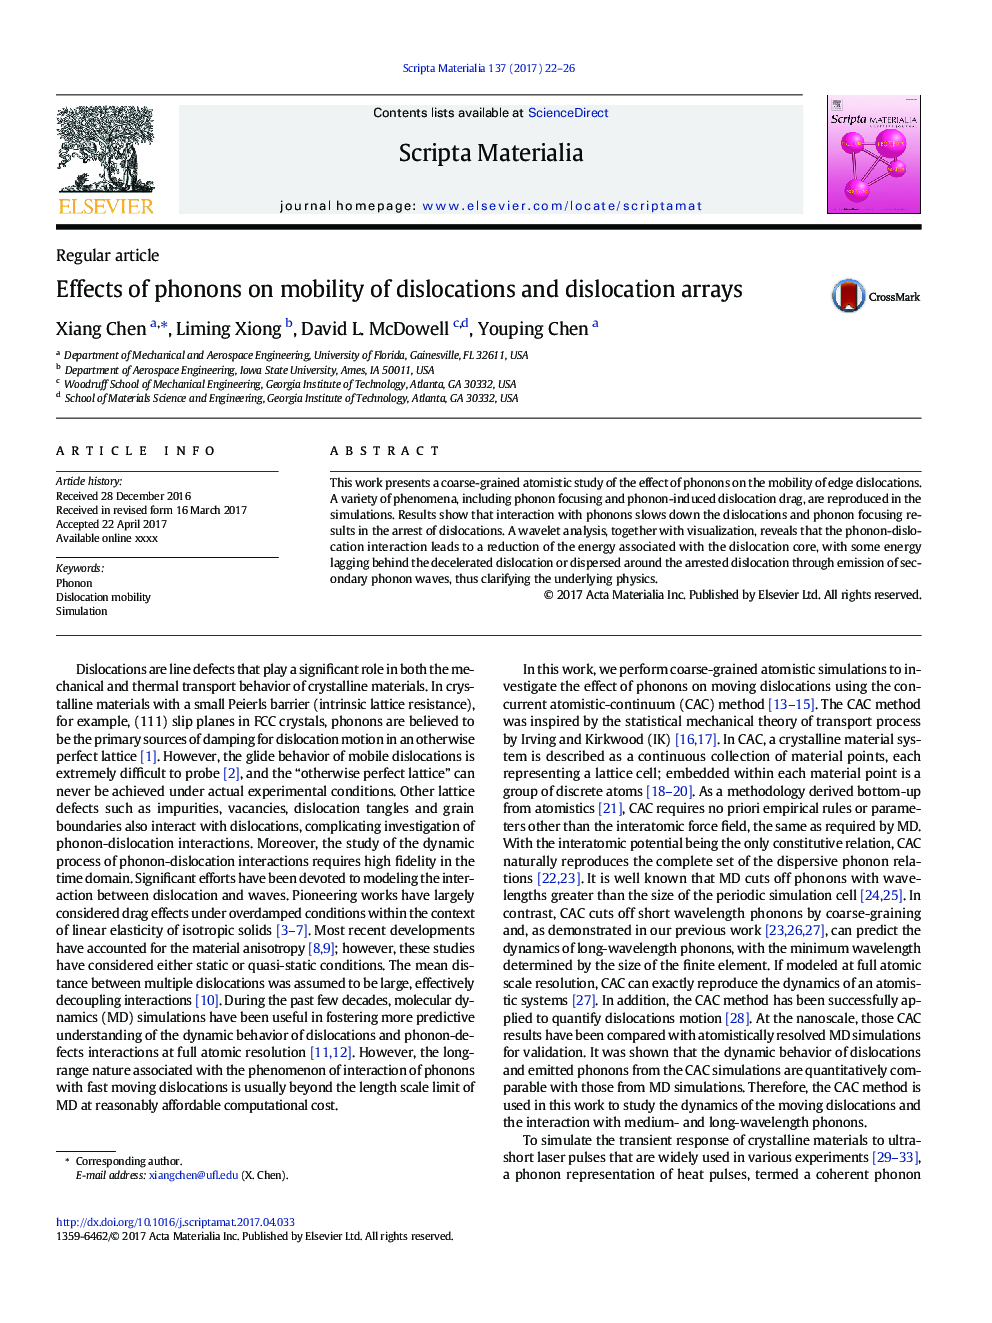 Effects of phonons on mobility of dislocations and dislocation arrays